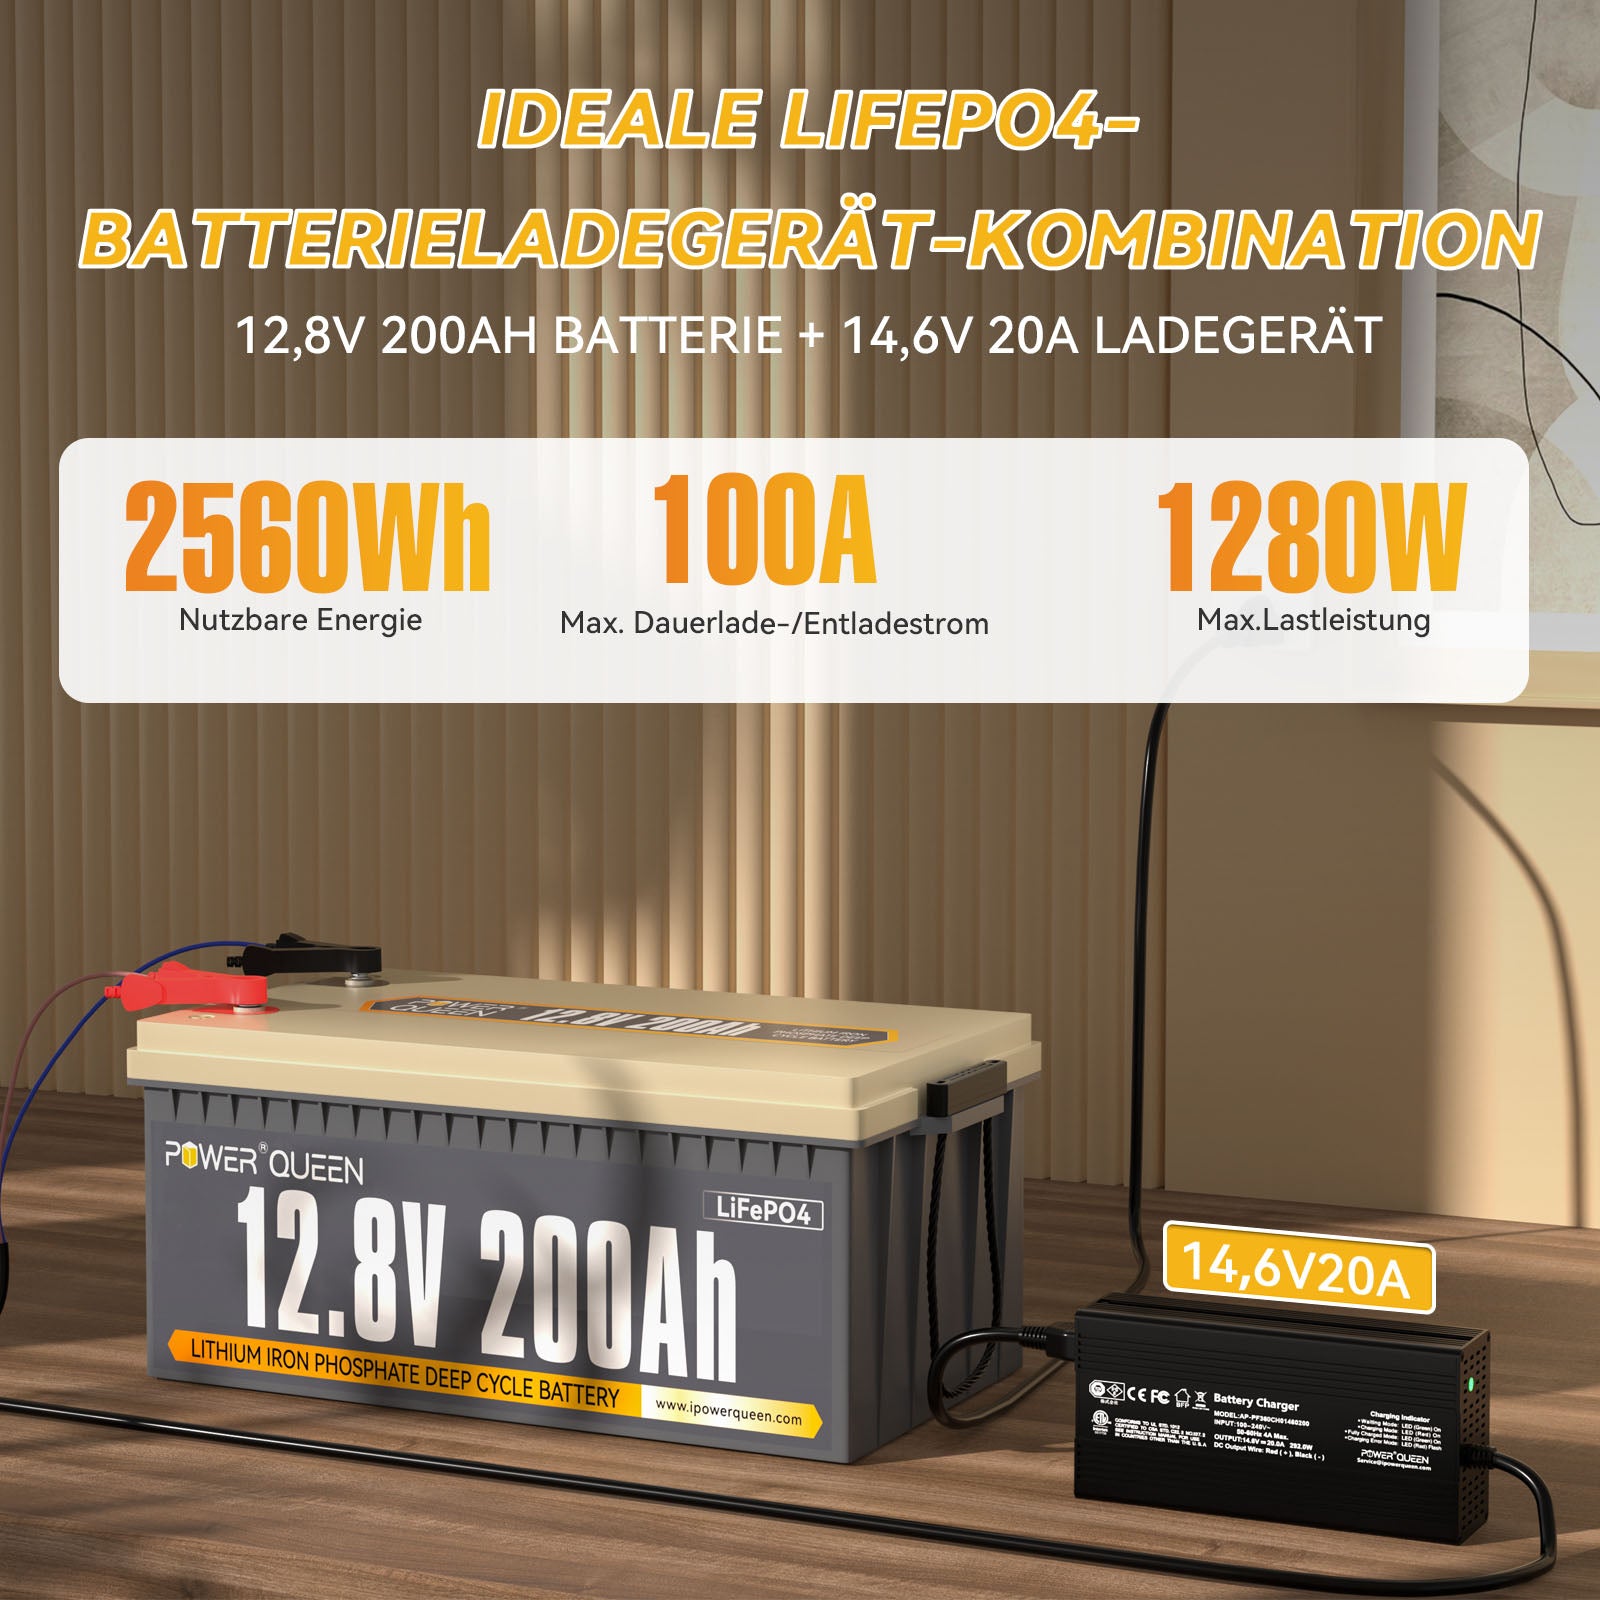 Power Queen 12.8V 200Ah LiFePO4 battery with 14.6V 20A LiFePO4 charger